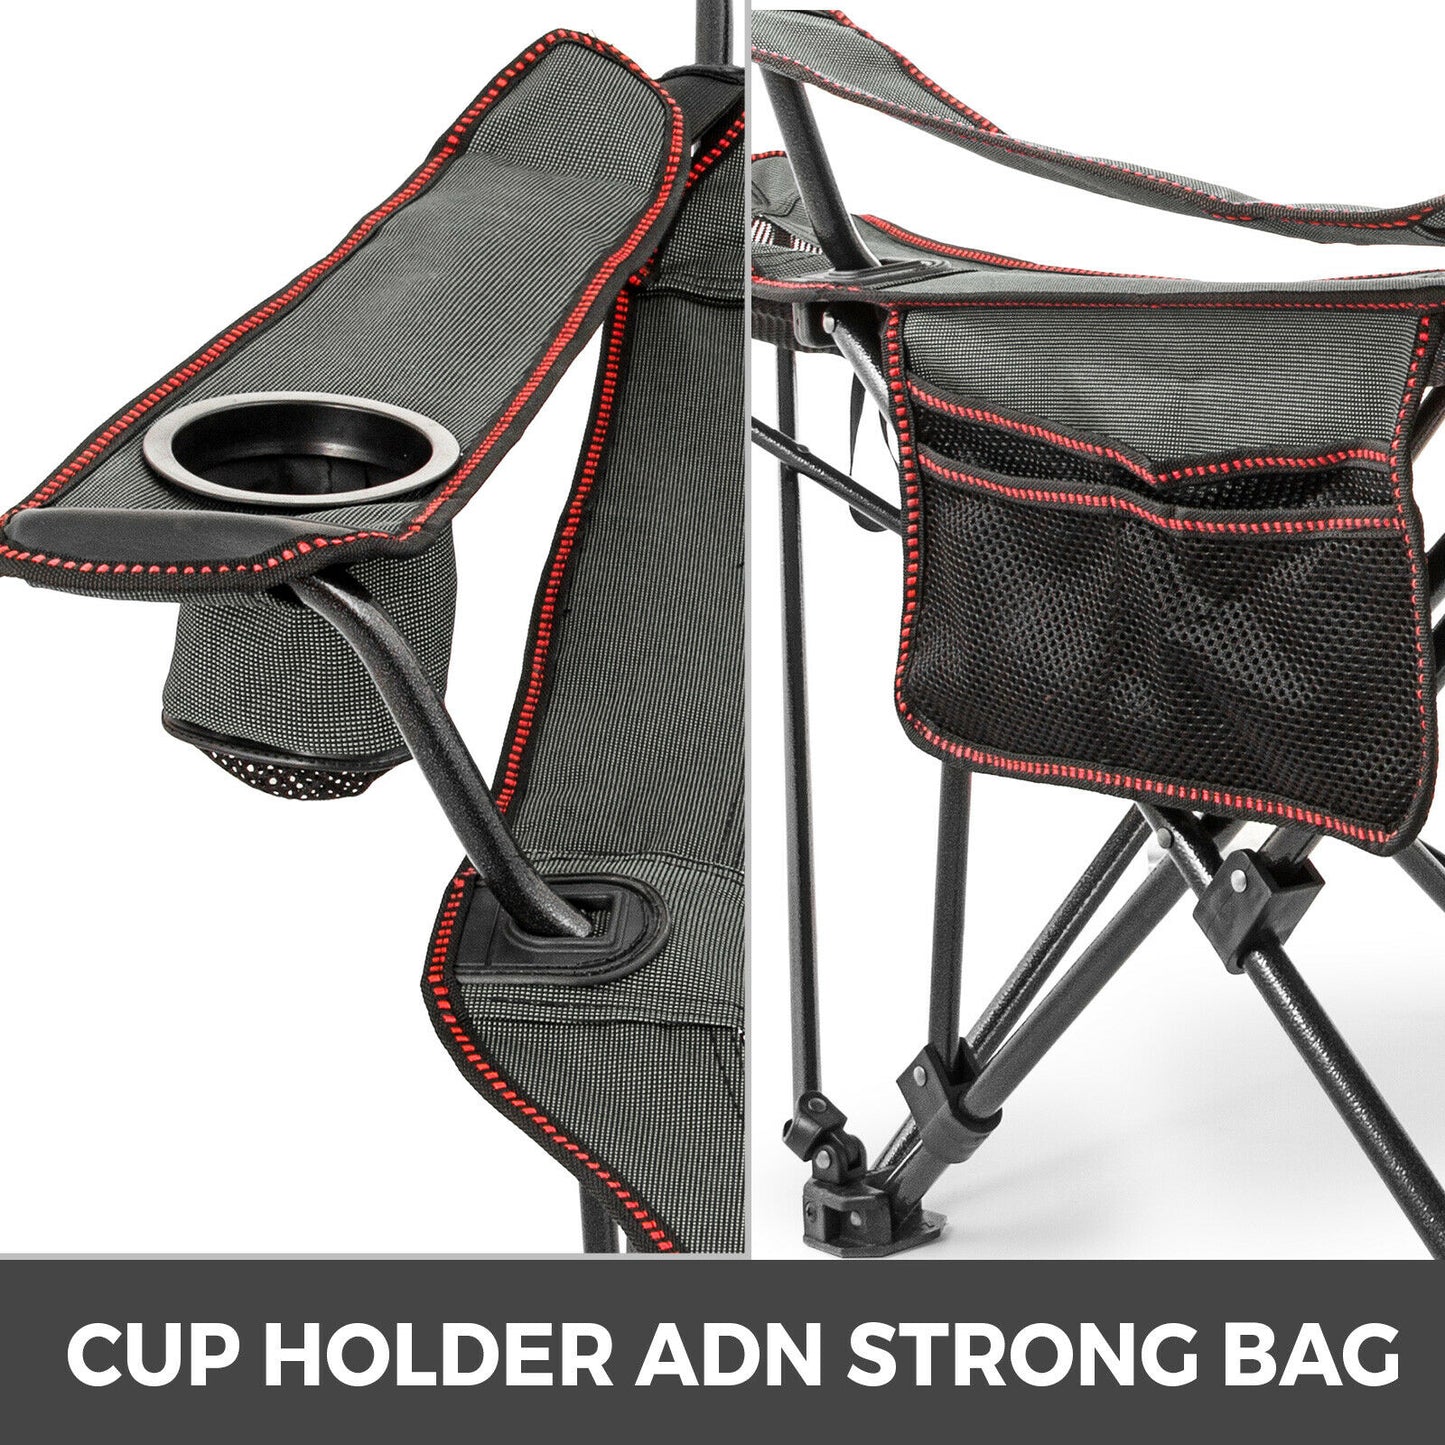 Folding Camp Chair With Footrest